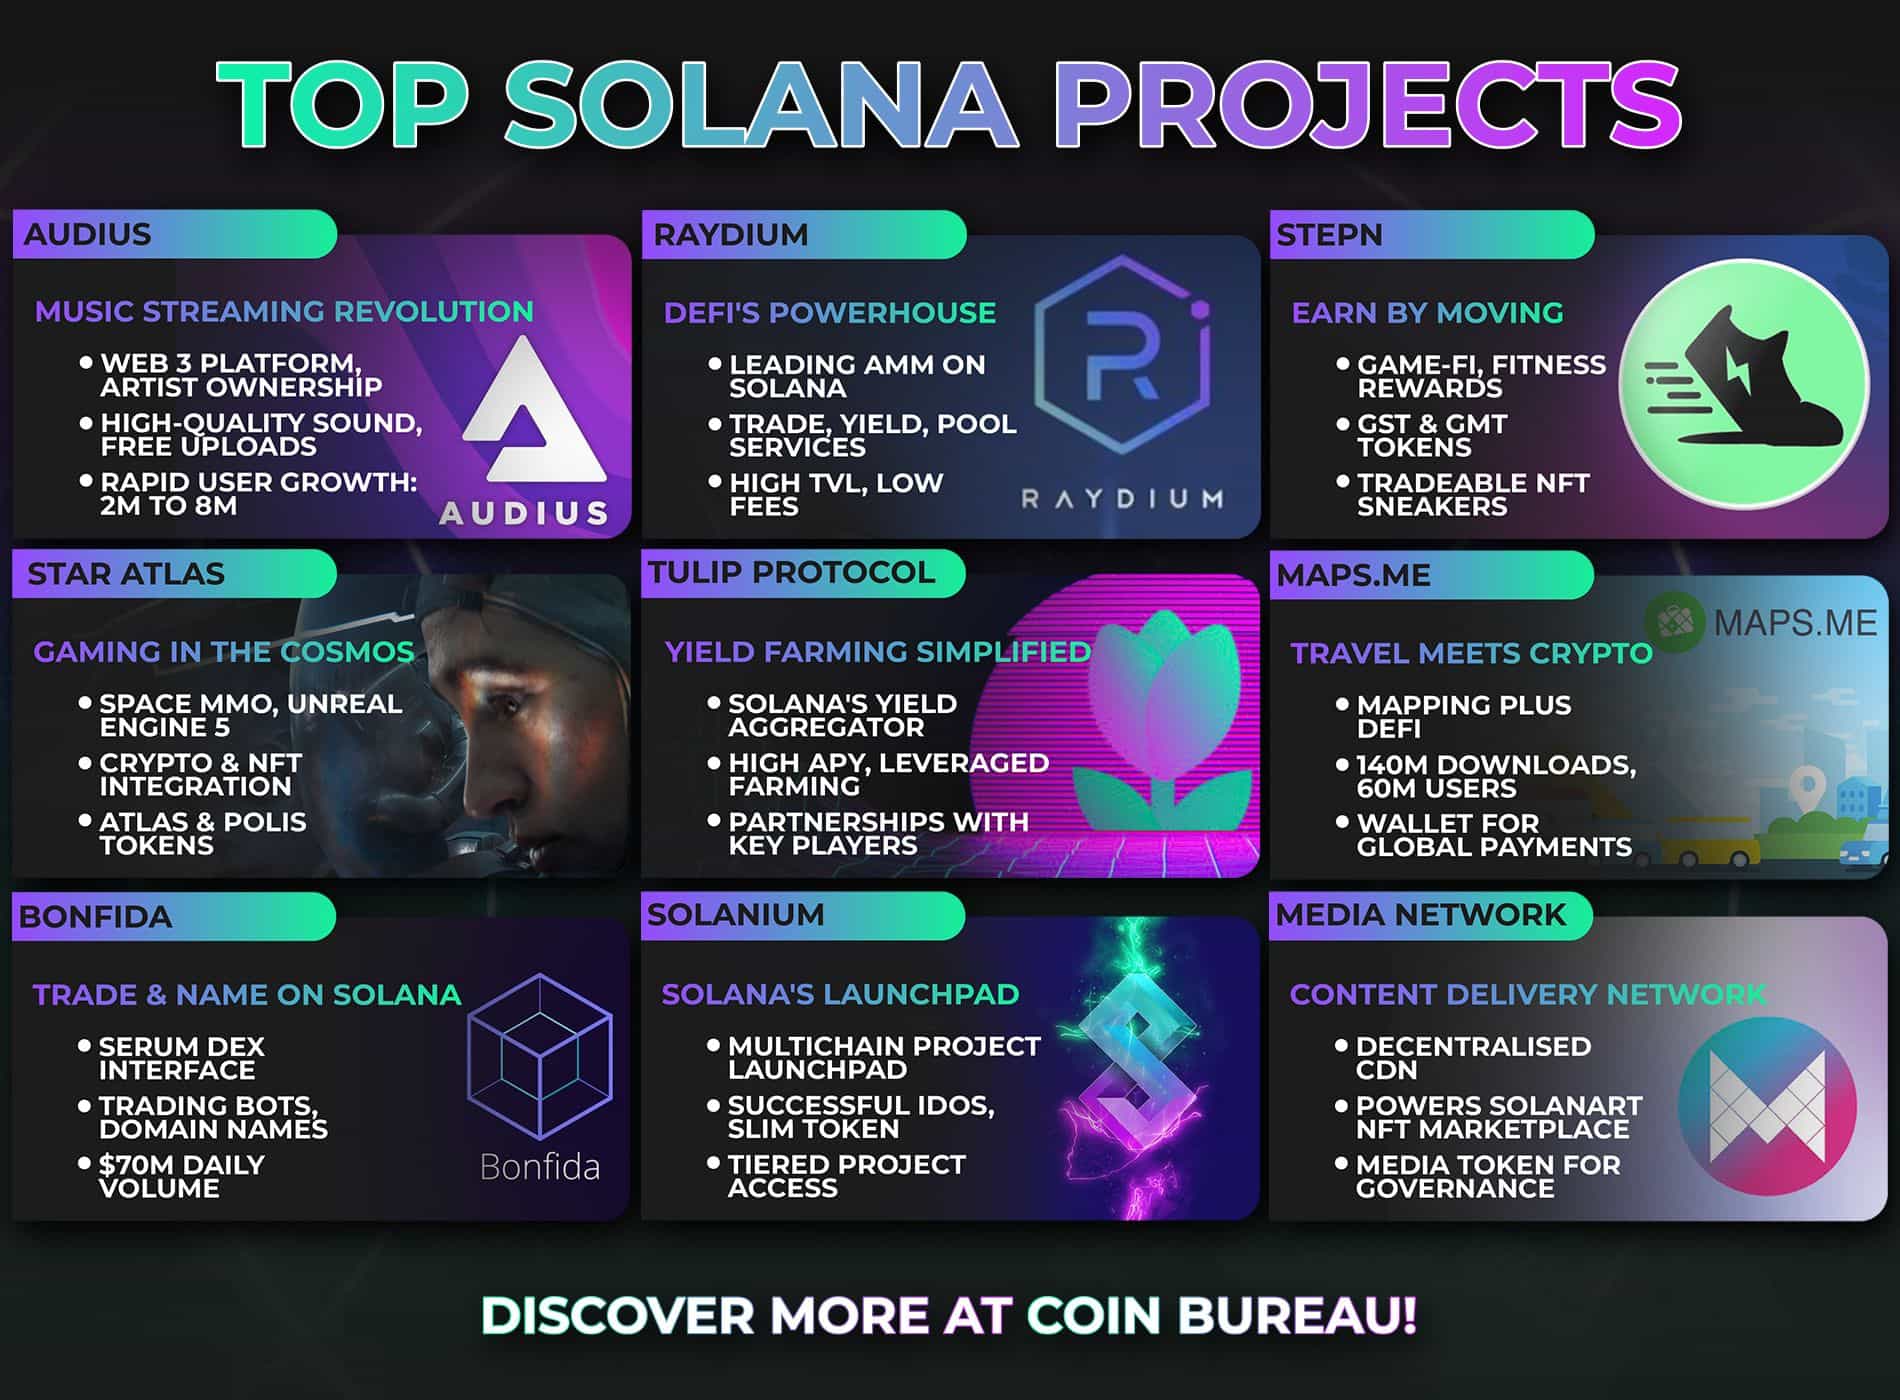 Top-Solana-Projects (1).jpg